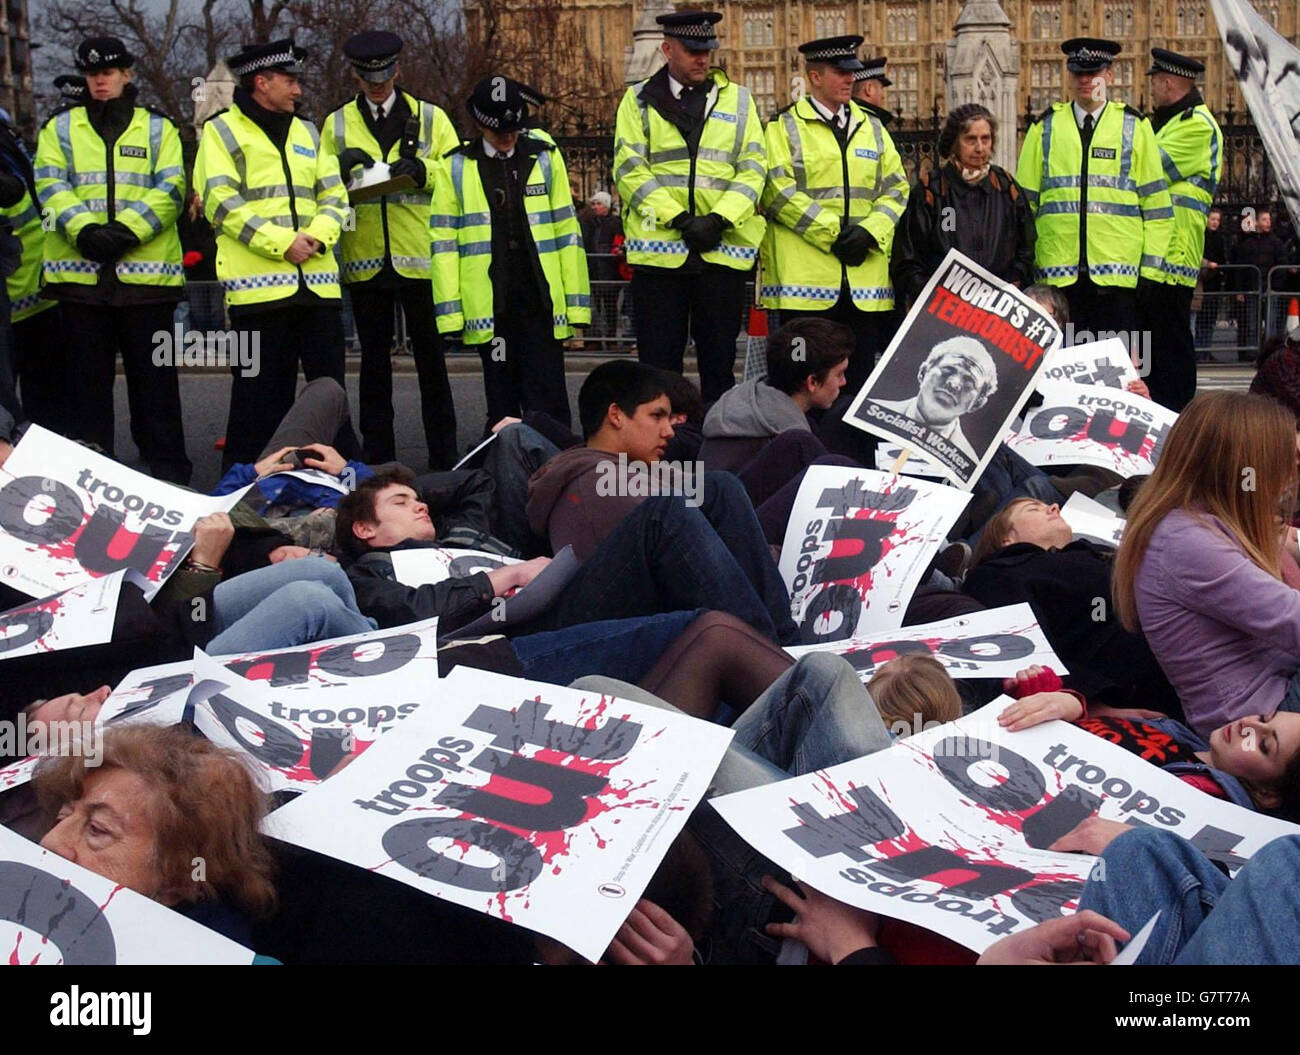 Dozens of anti-war protesters taking part in a mass 'die-in' outside Parliament. The protestors are calling for British troops to be withdrawn from Iraq. Chanting slogans and holding banners, the activists blocked two lanes of the road during the event organised by the Stop The War Coalition and CND. Stock Photo